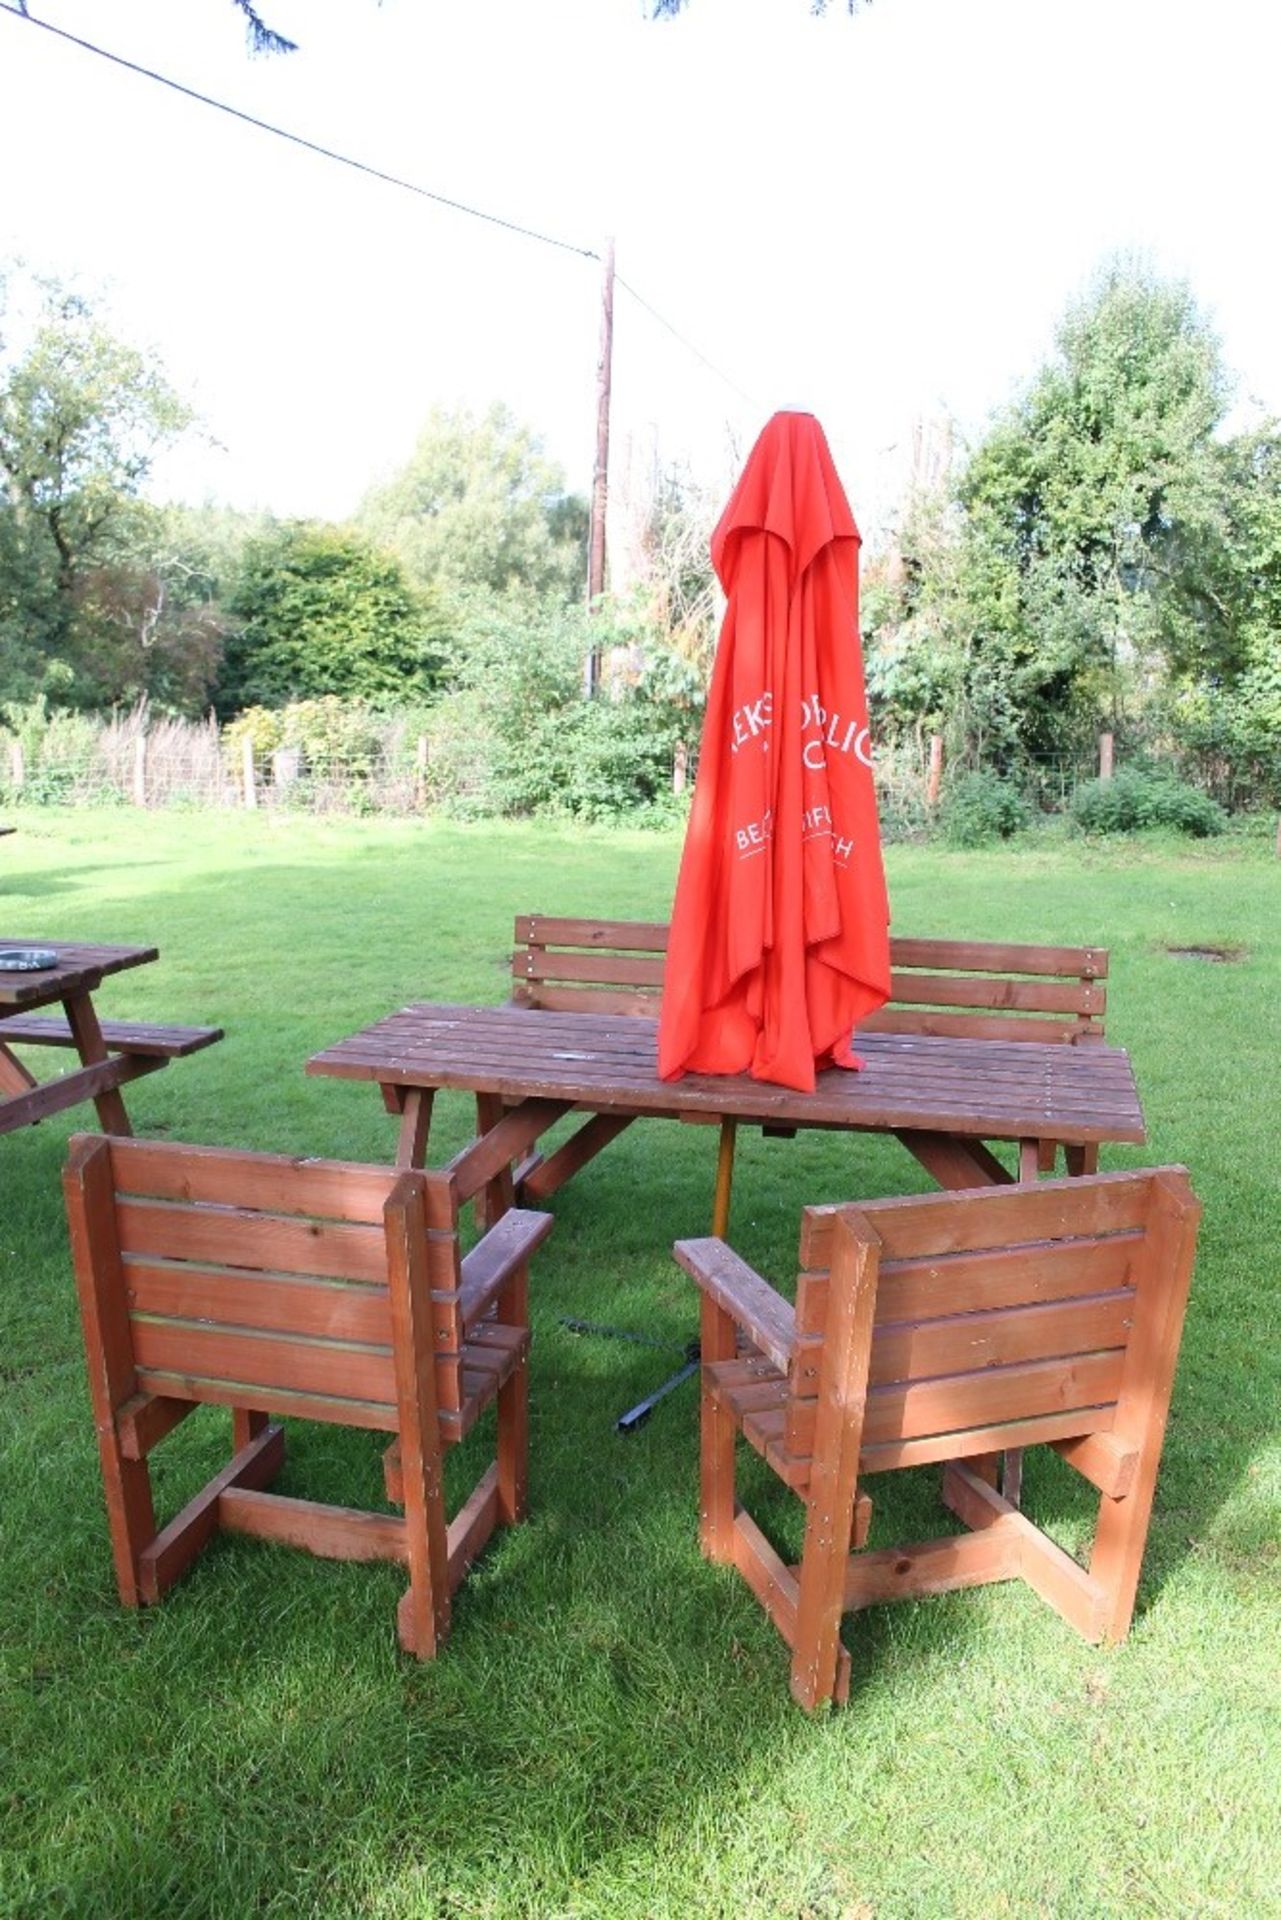 Beer Garden Furniture – Natural Wood – 6 Seater Bench, Table + 2 Chairs + Parasol - Buyer to collect - Image 3 of 3